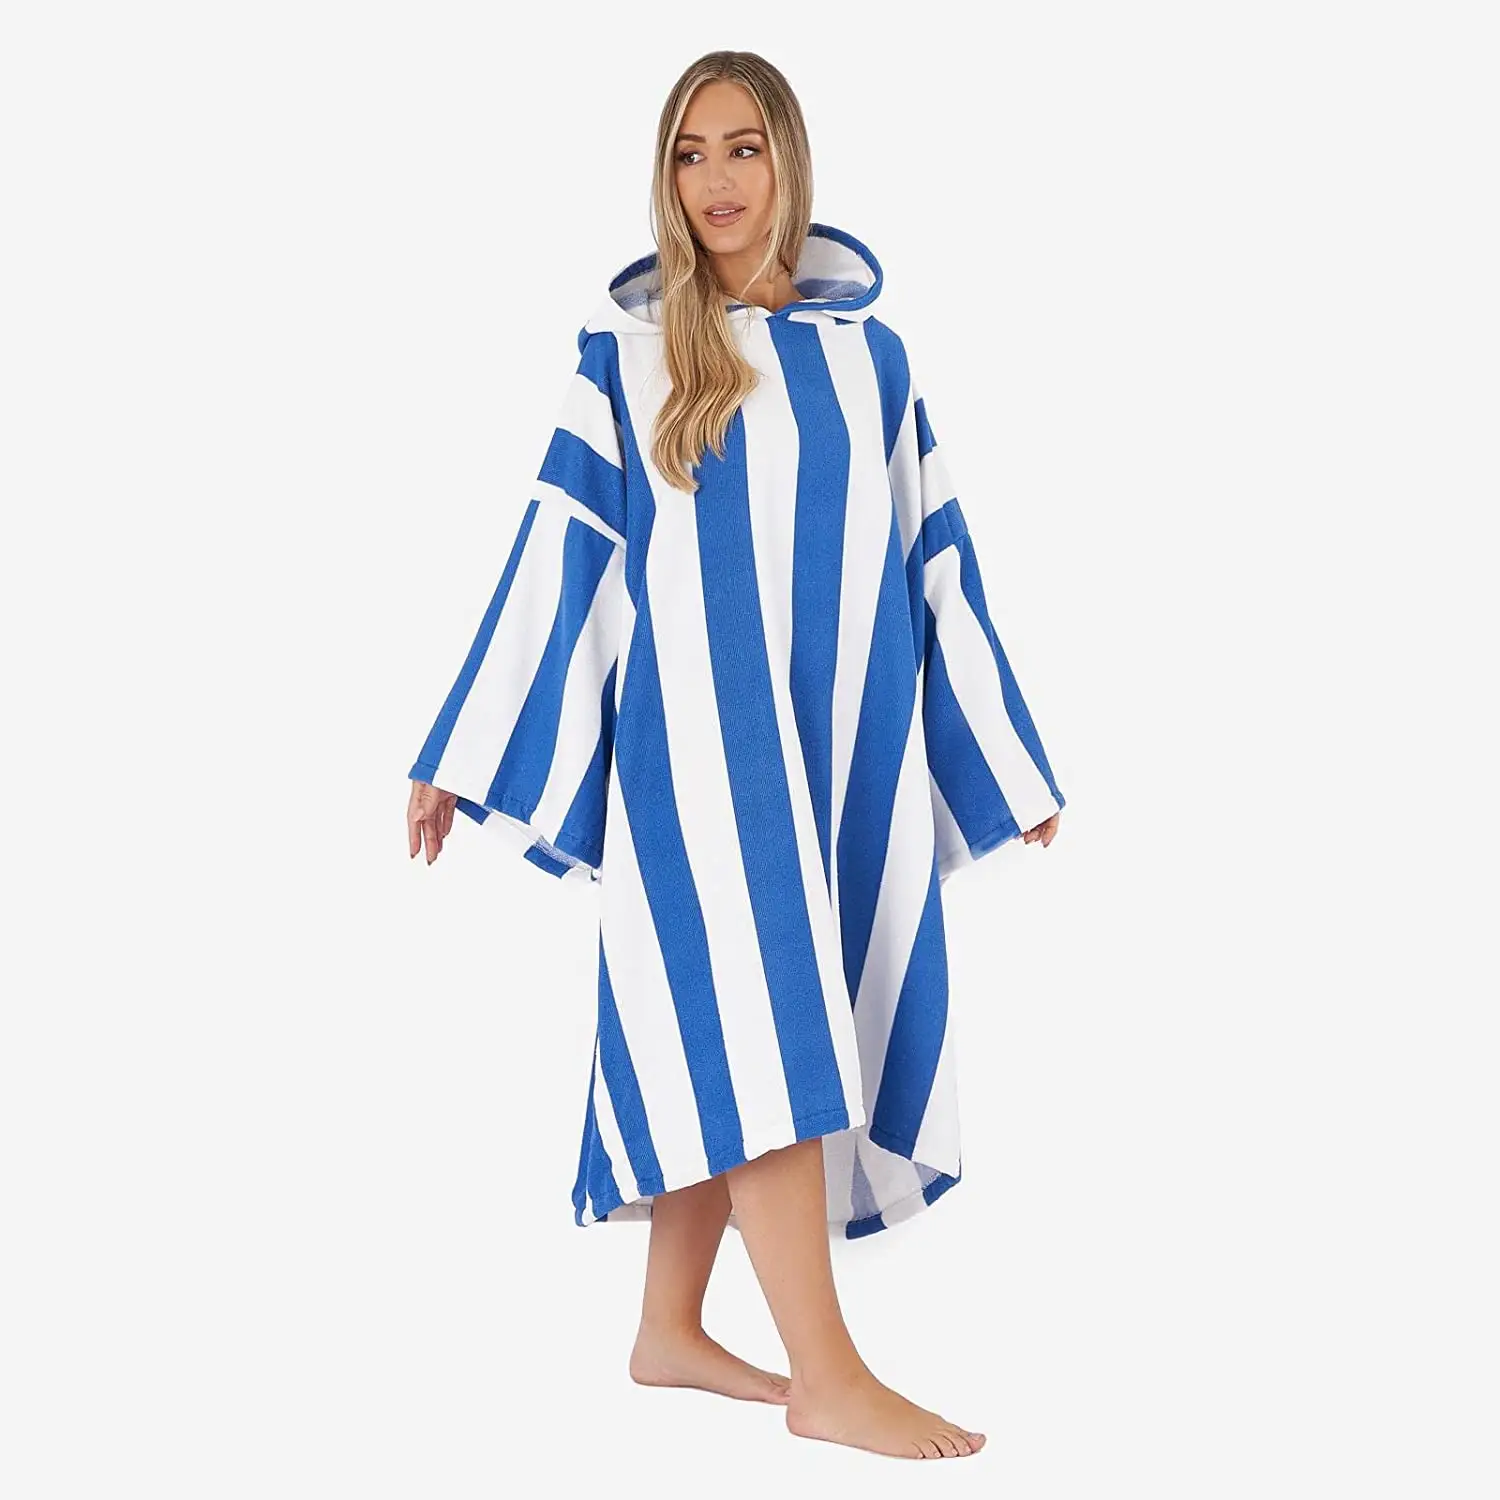 Poncho Towel Adult Hooded Oversized Bath Beach Surf Absorbent Microfiber Quick Dry Womens Changing Robe Manufacturer